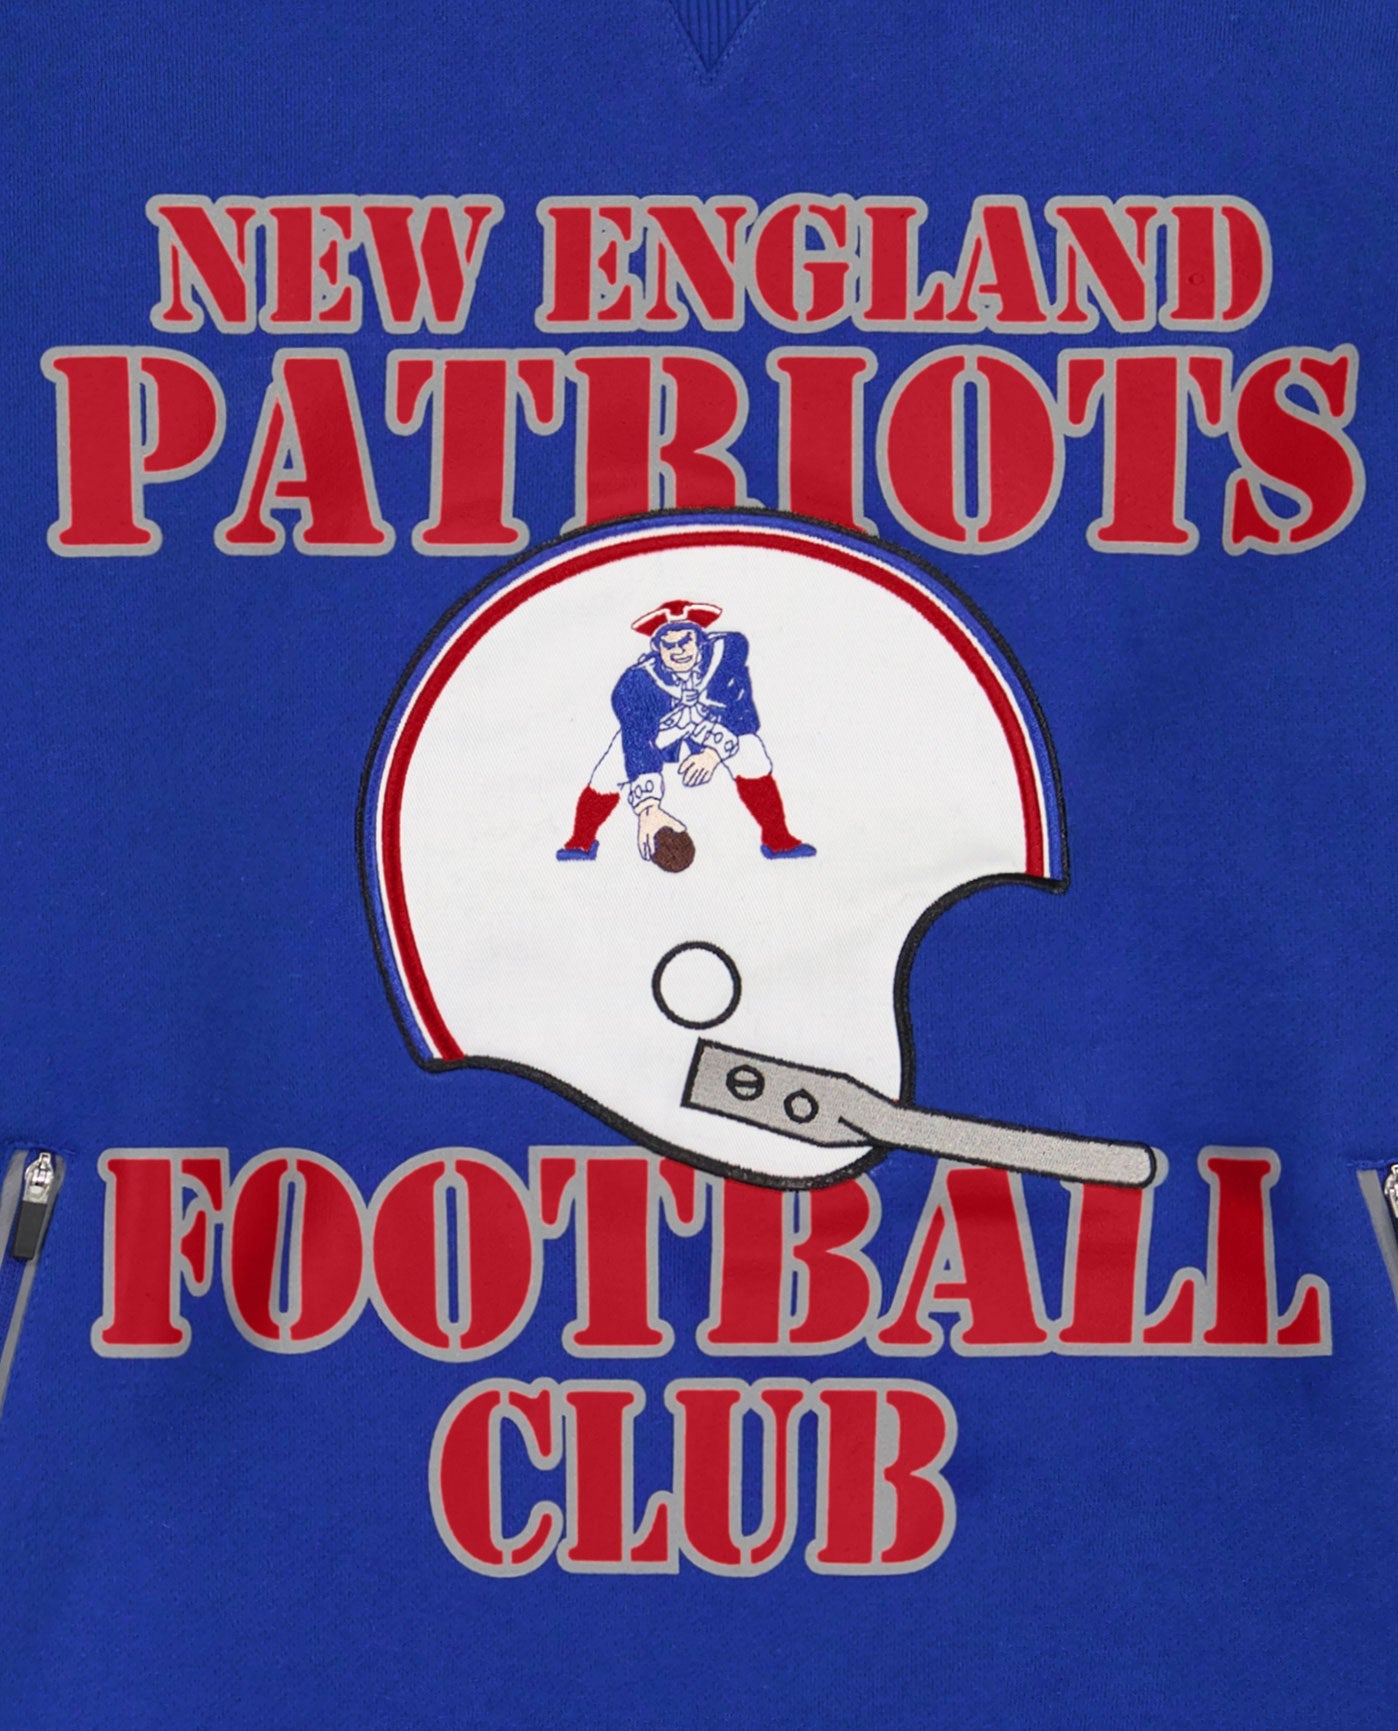 NEW ENGLAND PATRIOTS FOOTBALL CLUB writing and helemt logo front | Patriots Blue